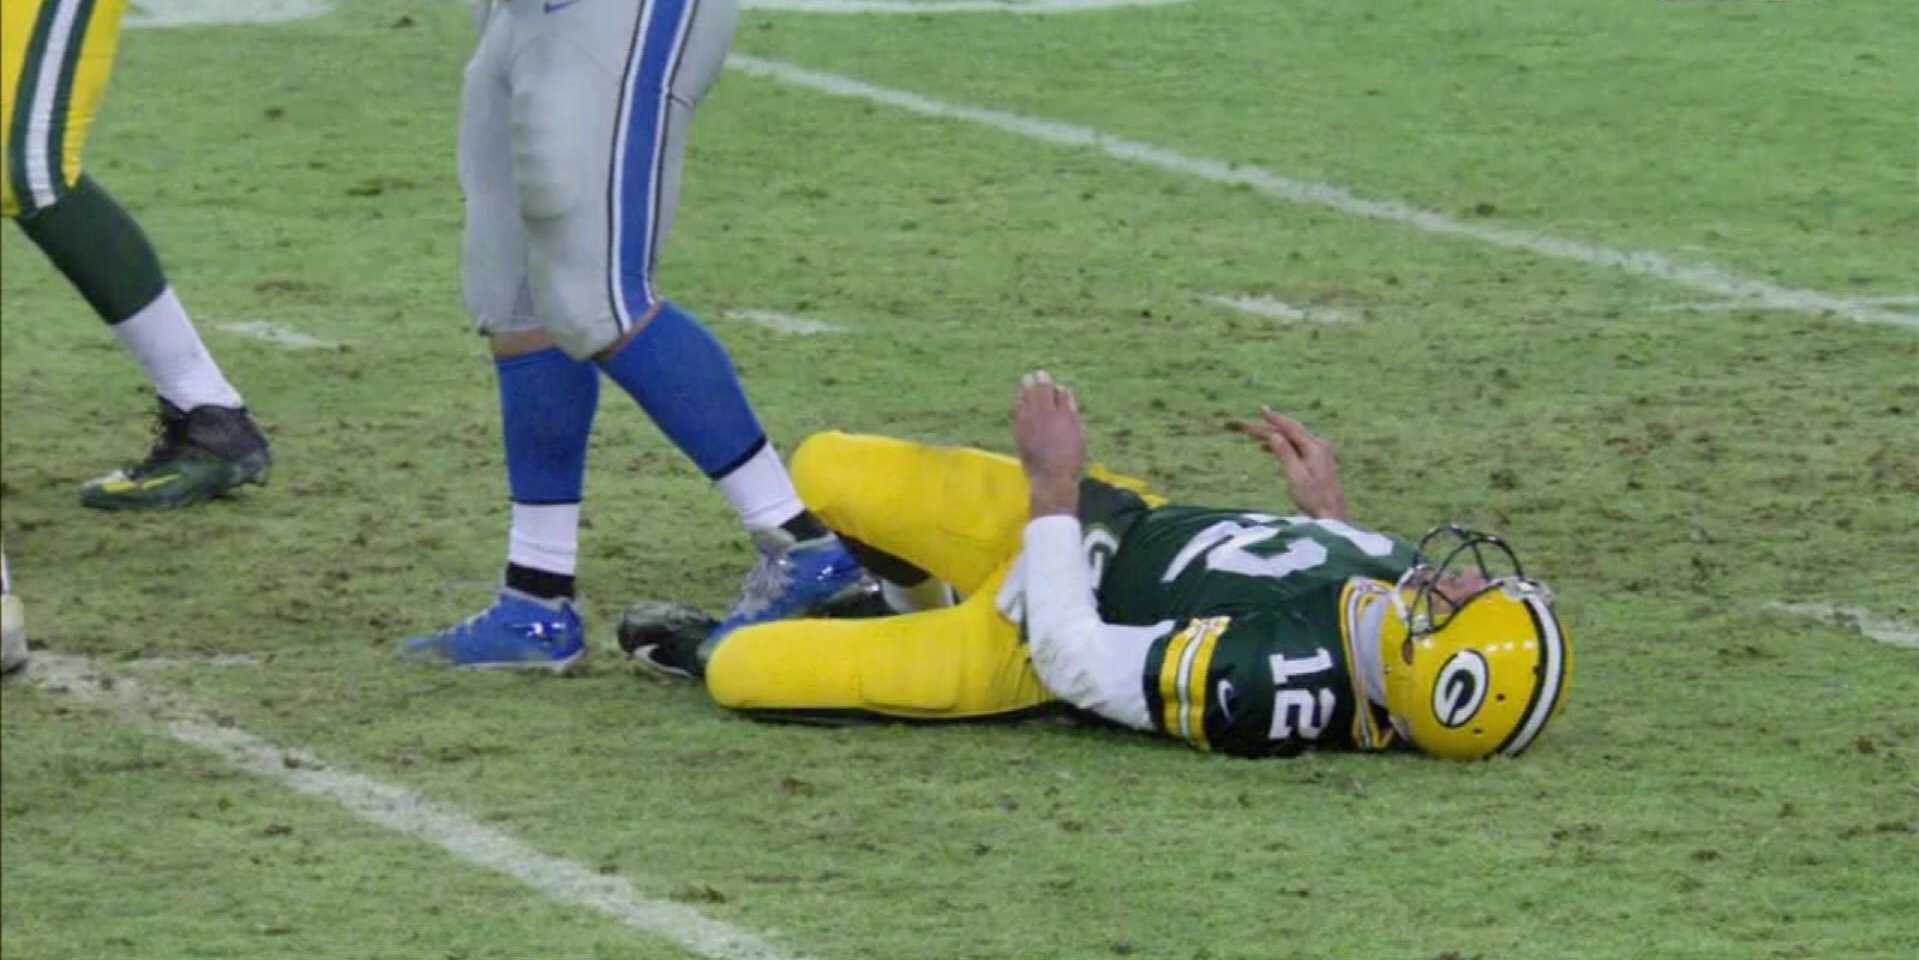 the-nfls-dirtiest-player-appeared-to-intentionally-stomp-on-aaron-rodgers-injured-calf.jpg